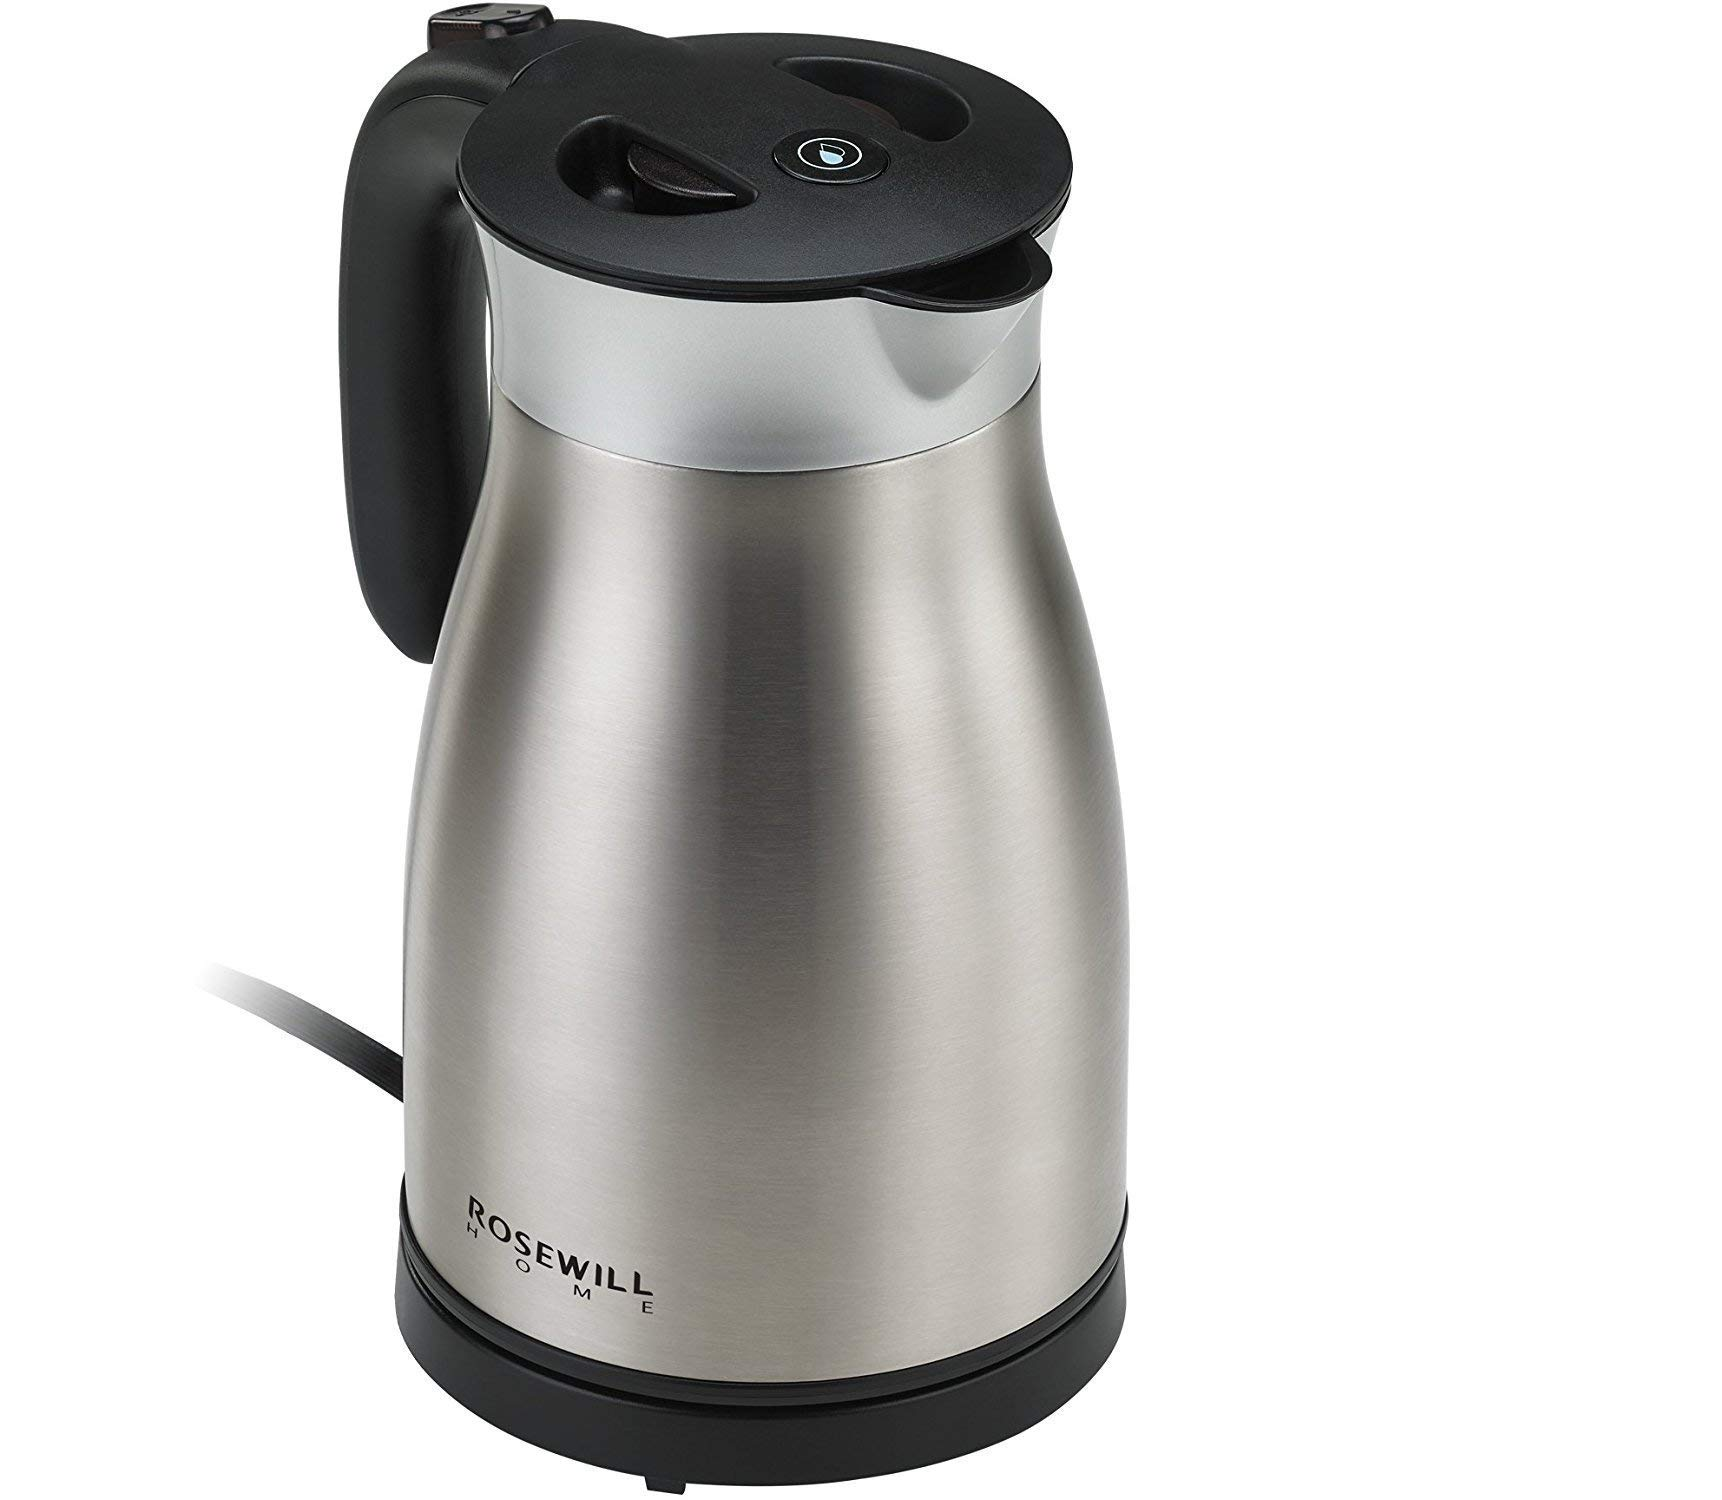 Rosewill Electric Kettle Stainless Steel Double Wall Va...